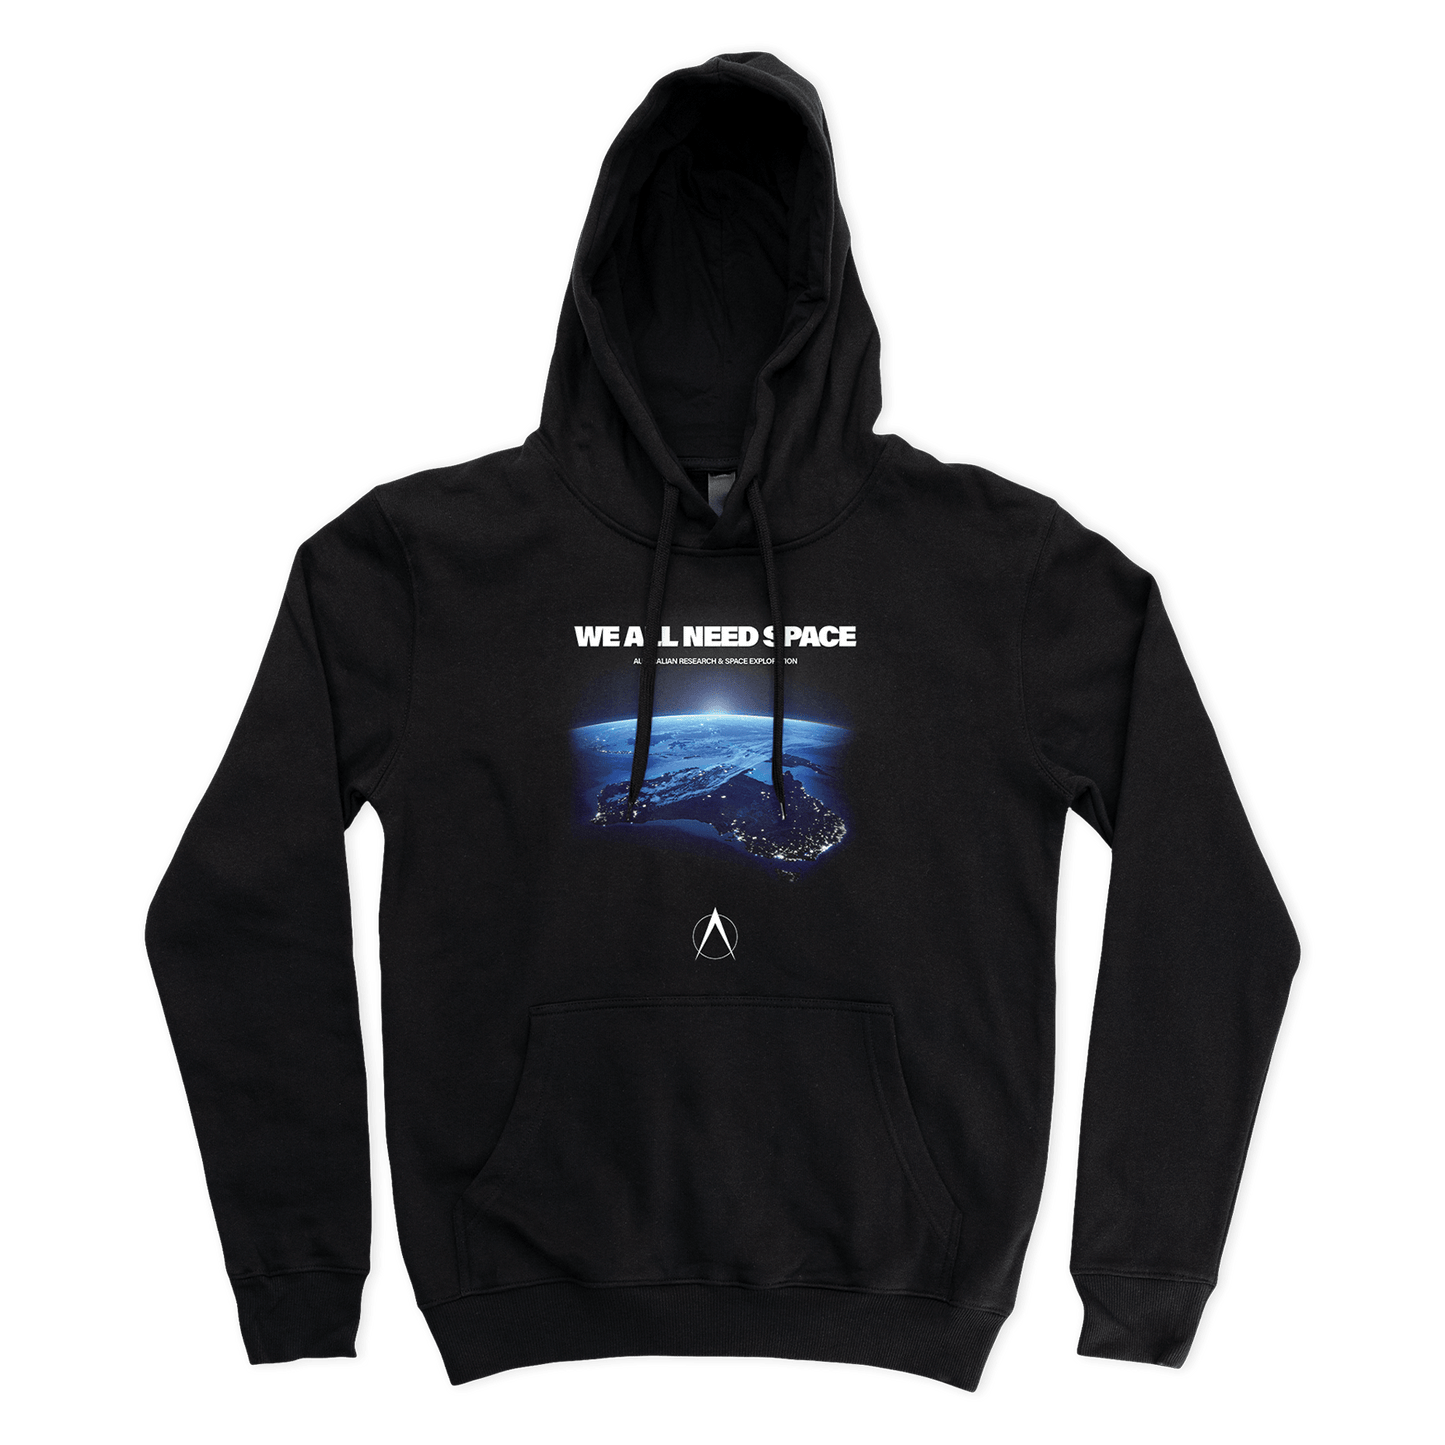 We All Need Space Hoodie – Australian Research & Space Exploration